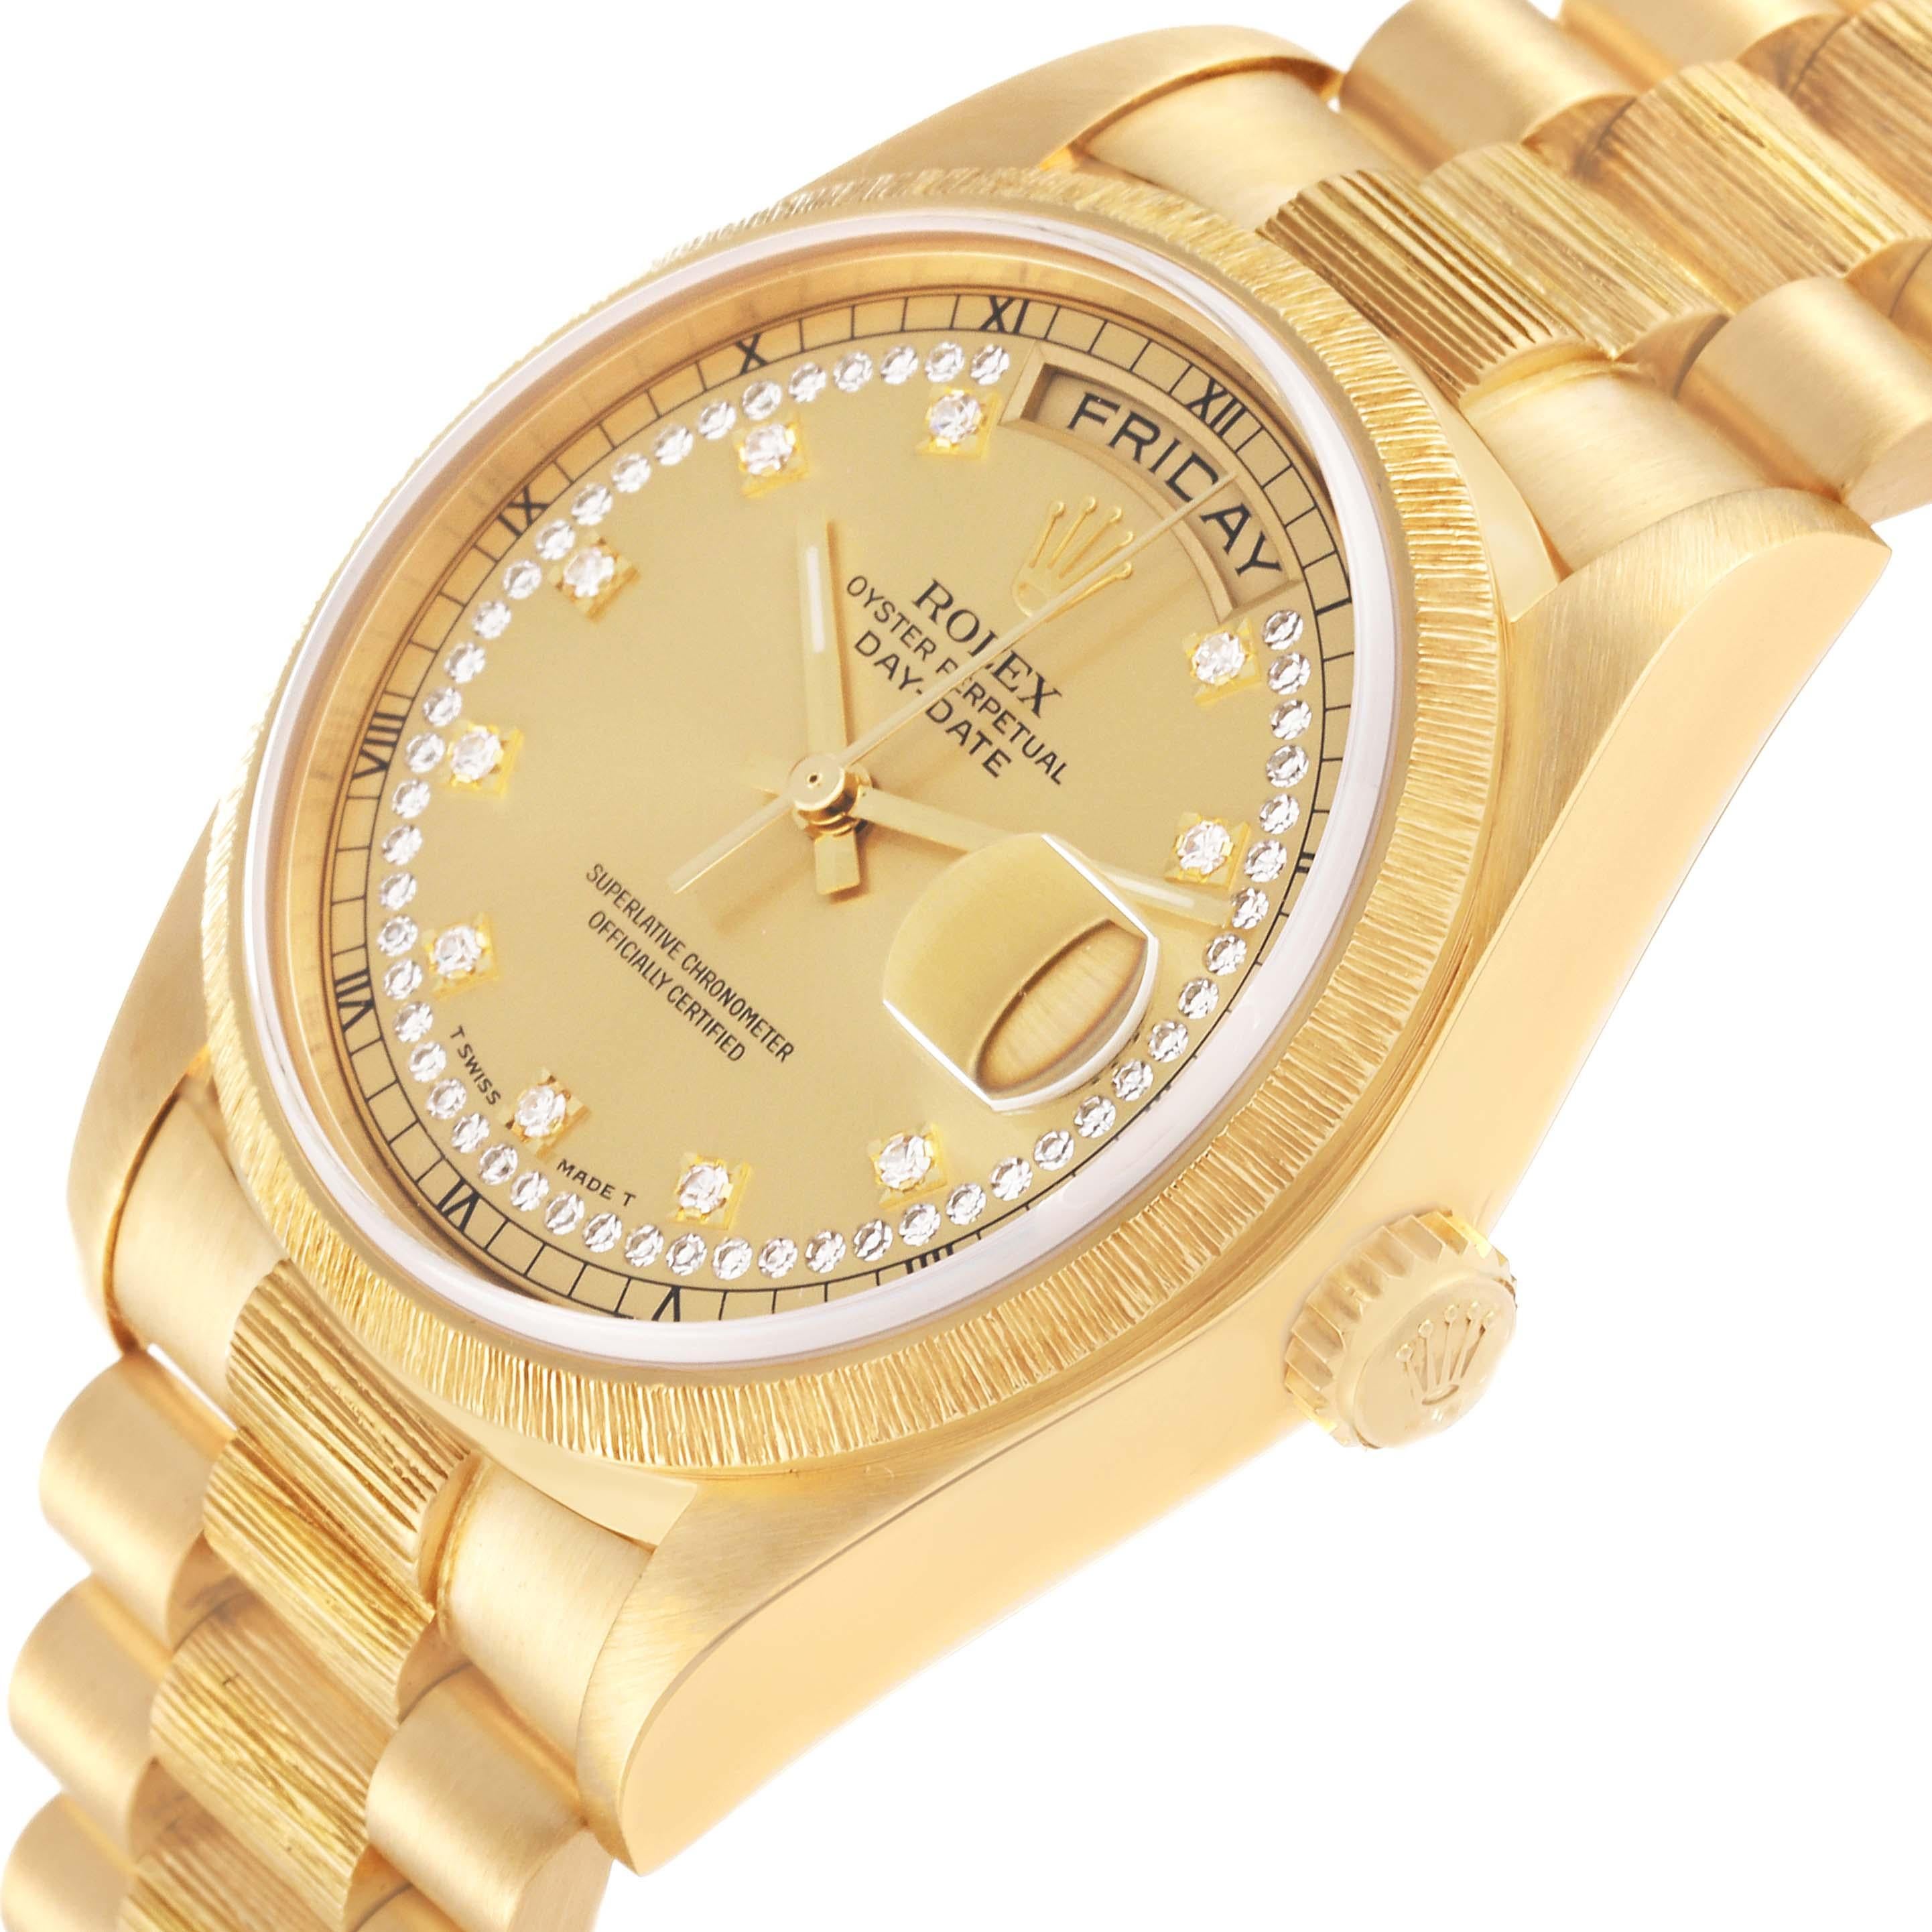 Rolex President Day-Date Diamond Dial Yellow Gold Bark Finish Mens Watch 18078 For Sale 2